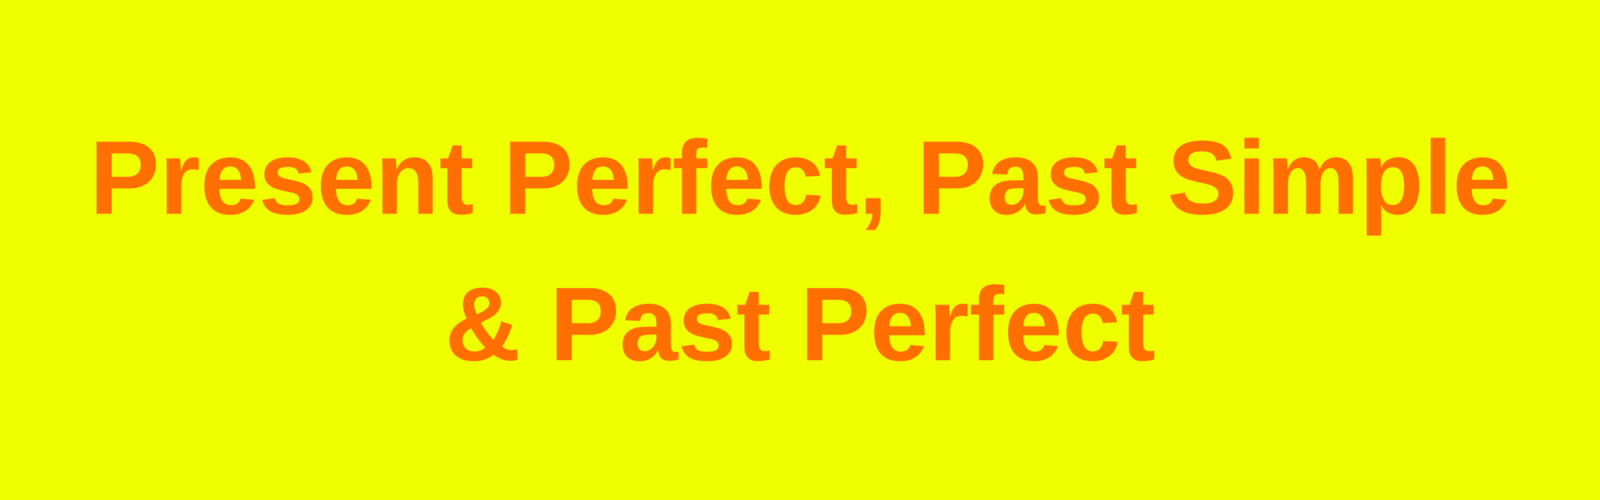 Past Simple, Past Perfect, Present Perfect